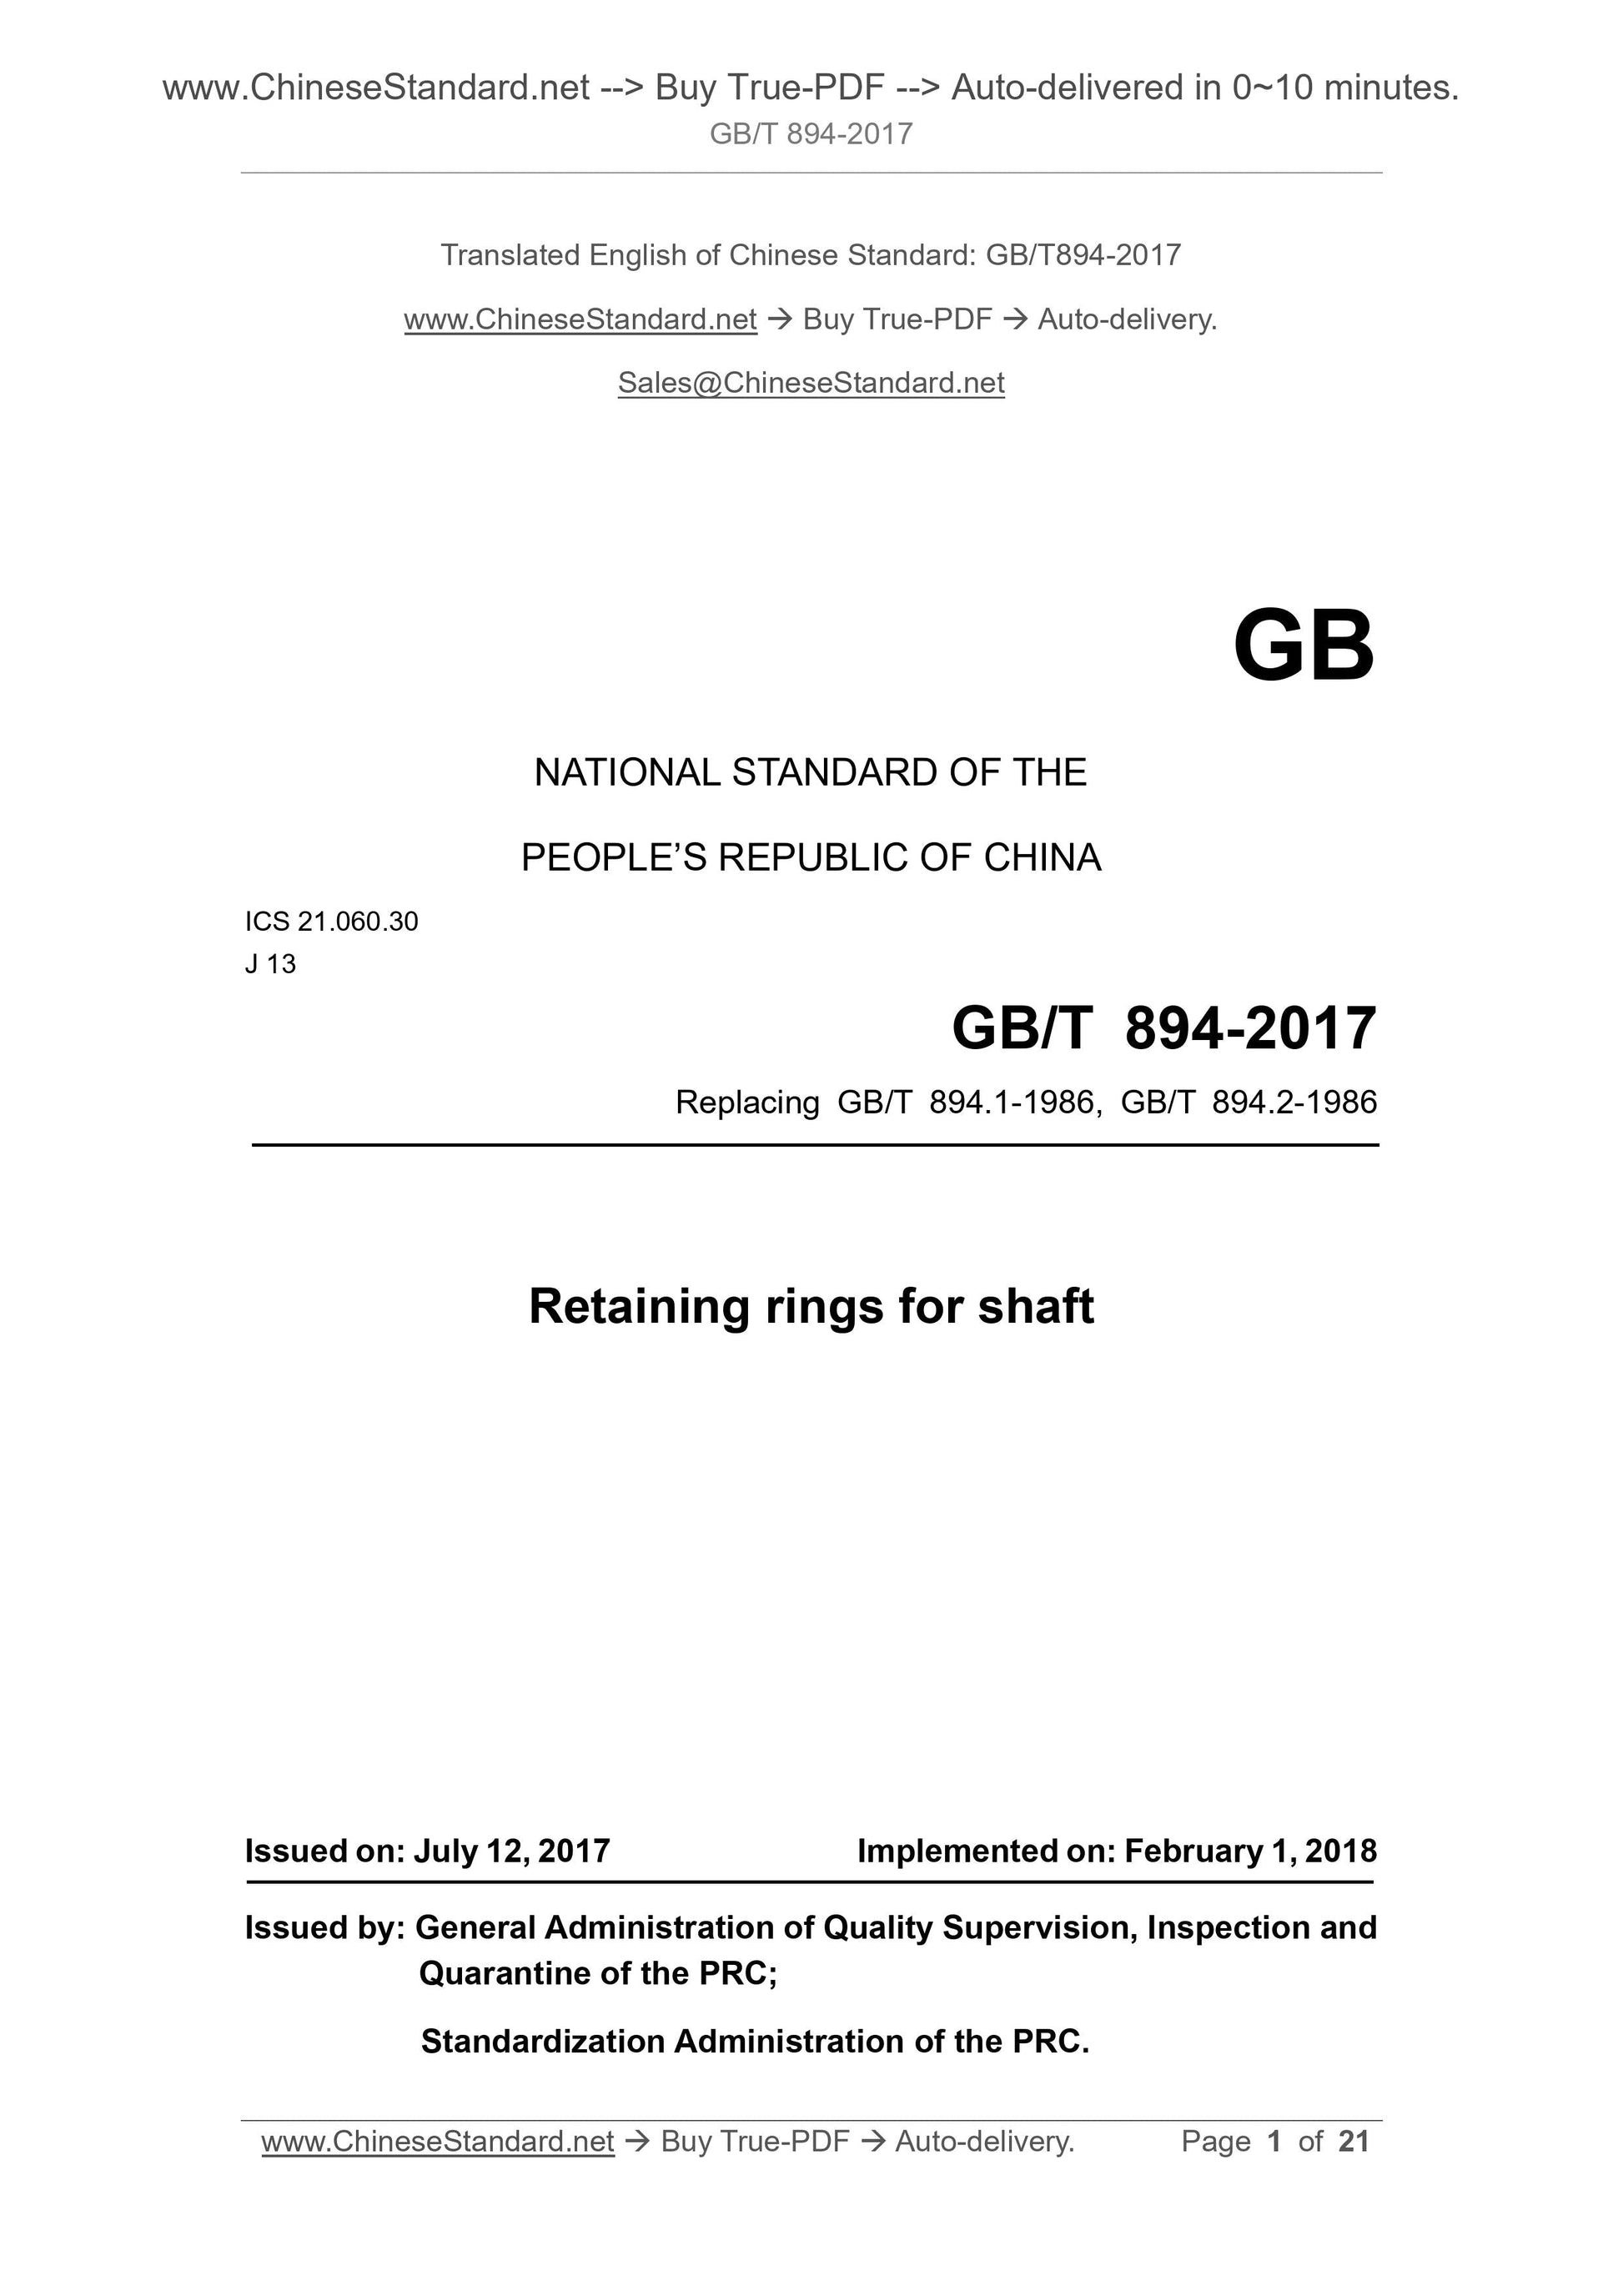 GB/T 894-2017 Page 1